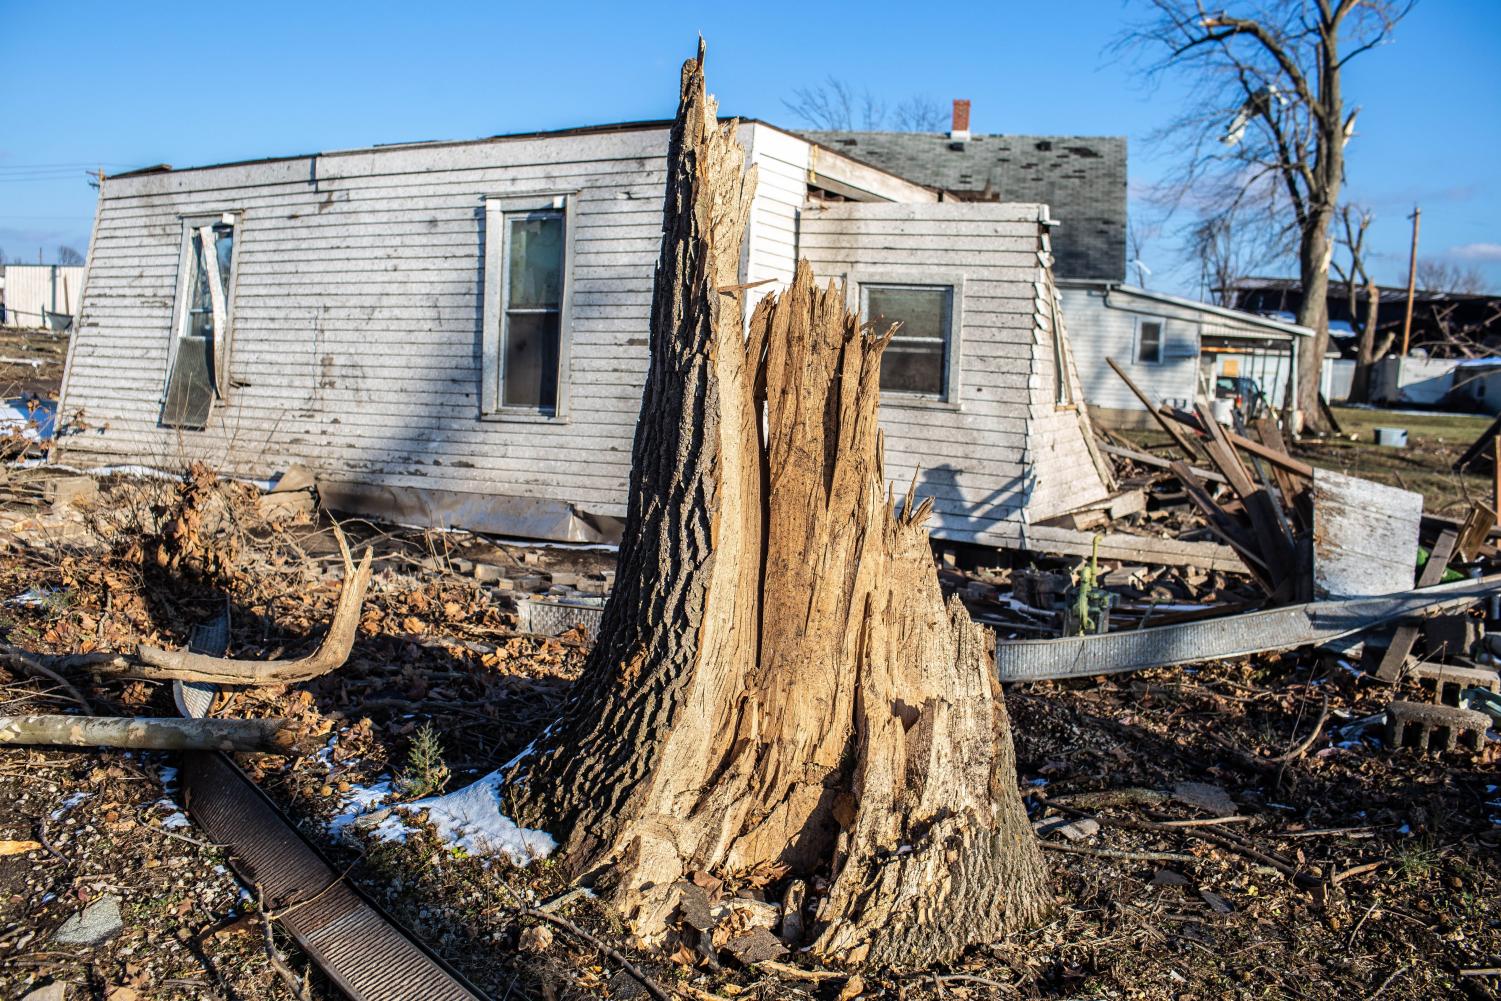 Gallery Taylorville tornado The Daily Illini